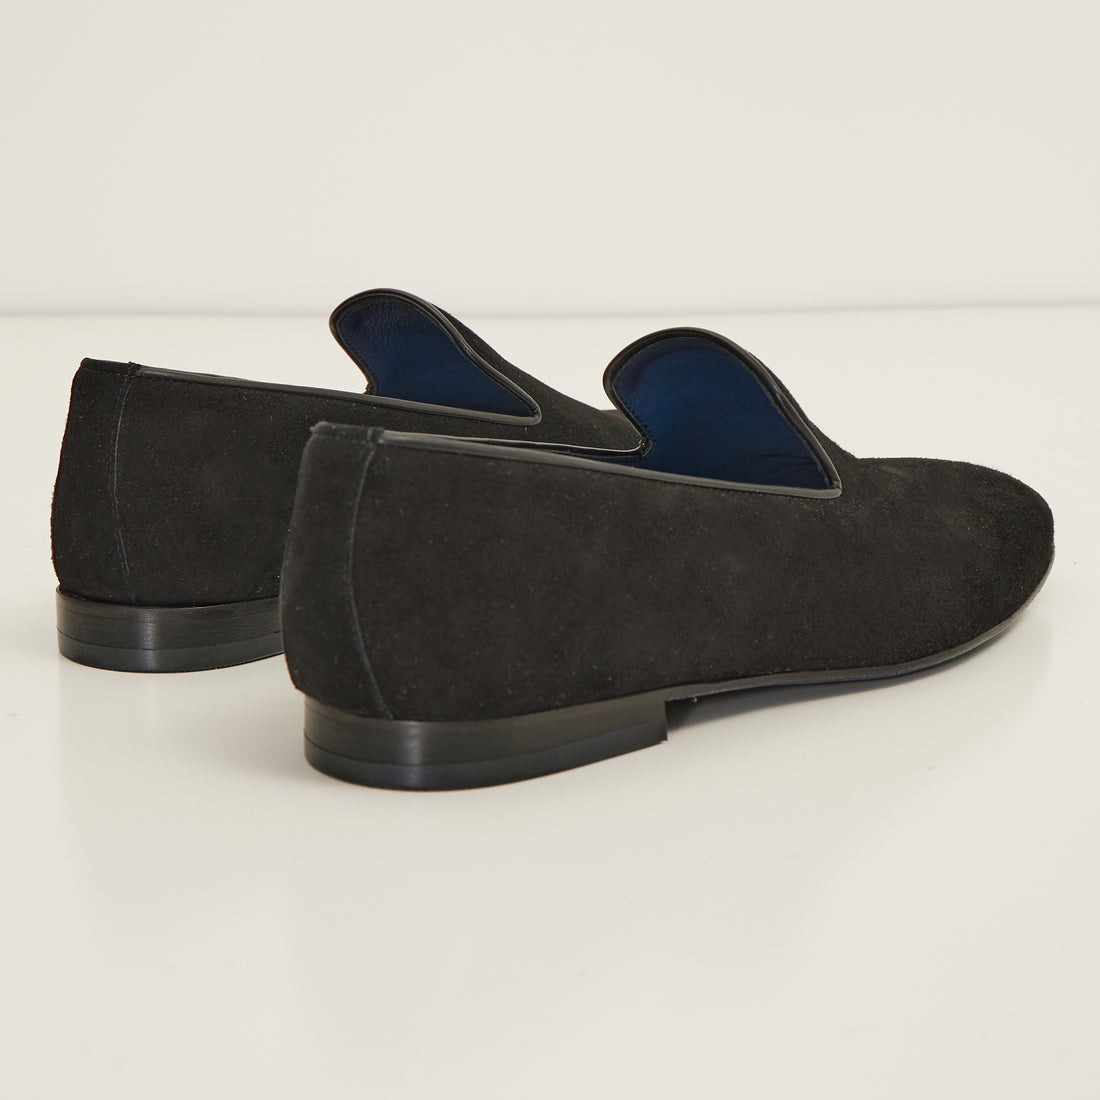 The Formal Leather Loafer - Black Suede